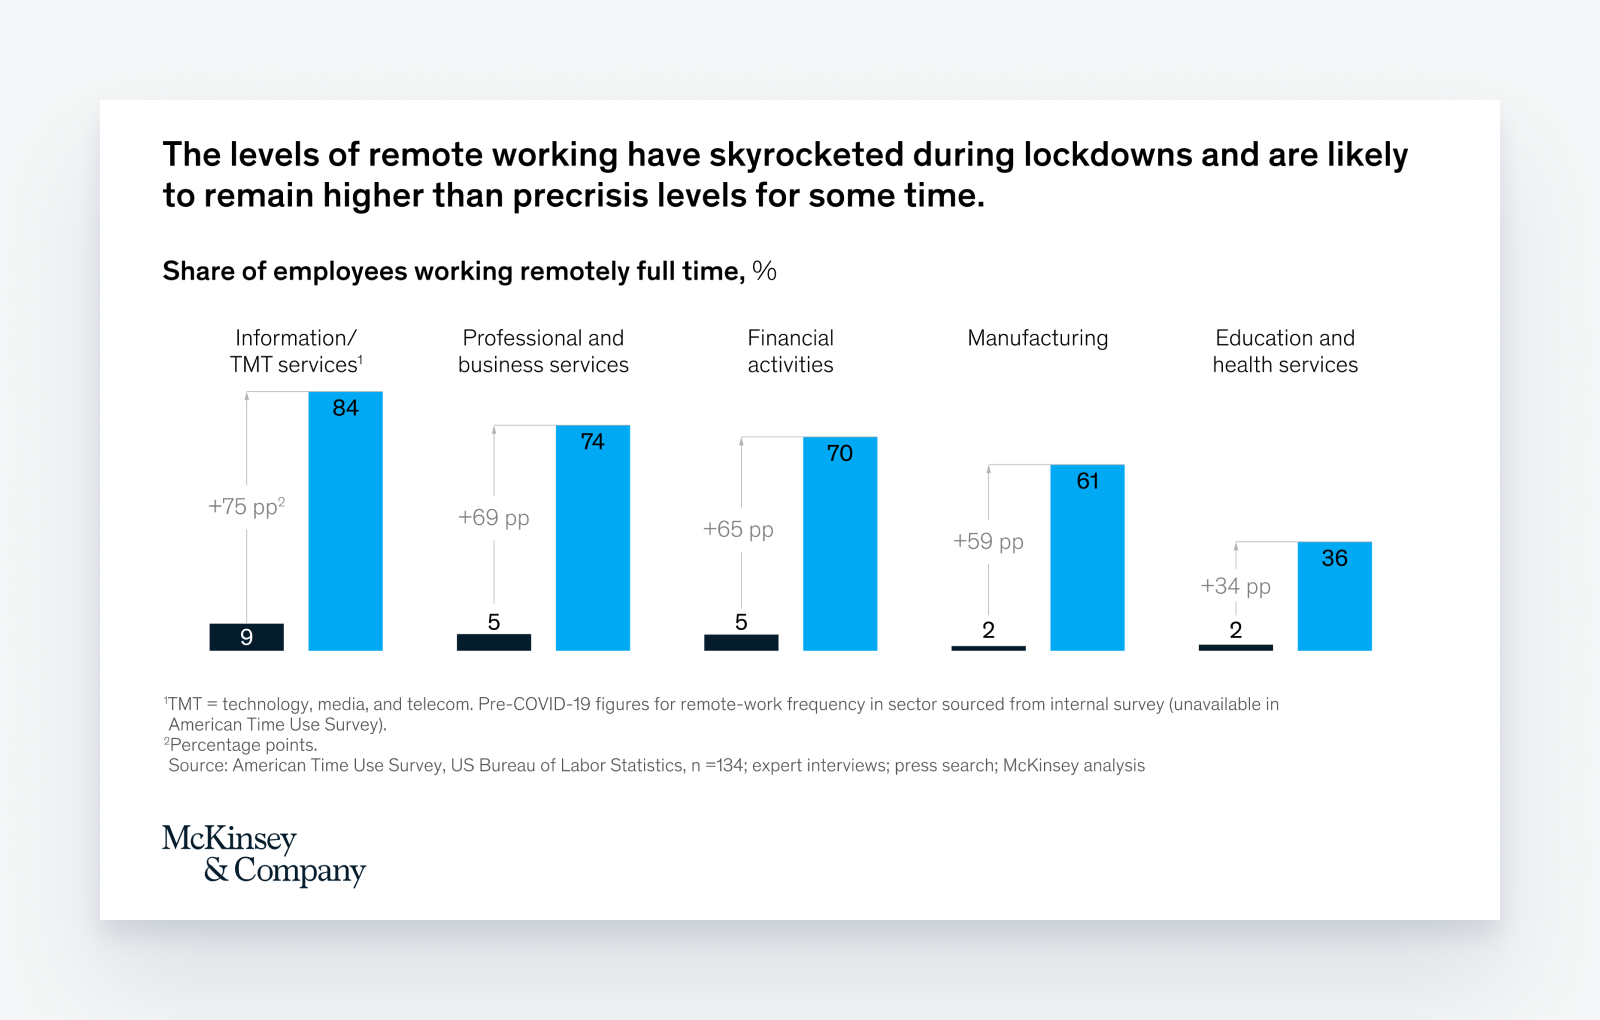 The levels of remote working have skyrocketd during lockdowns and are likely to remain higher than precrisis levels for some time. - McKinsey & Company 2020